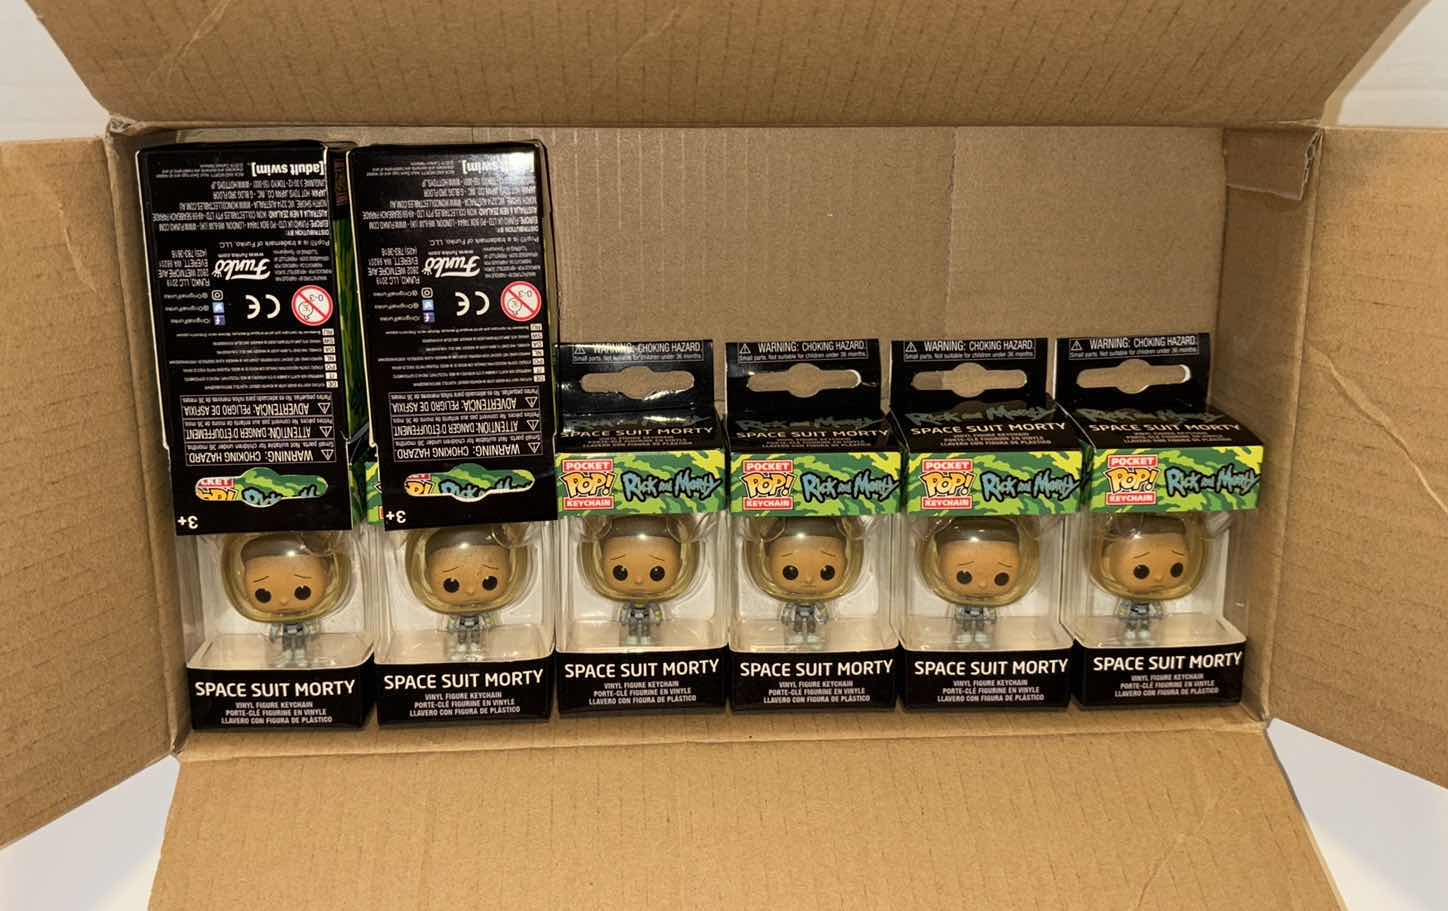 Photo 4 of NEW FUNKO POP! POCKET POP! VINYL FIGURE KEYCHAIN, RICK AND MORTY “SPACE SUIT MORTY” (8-PACK)